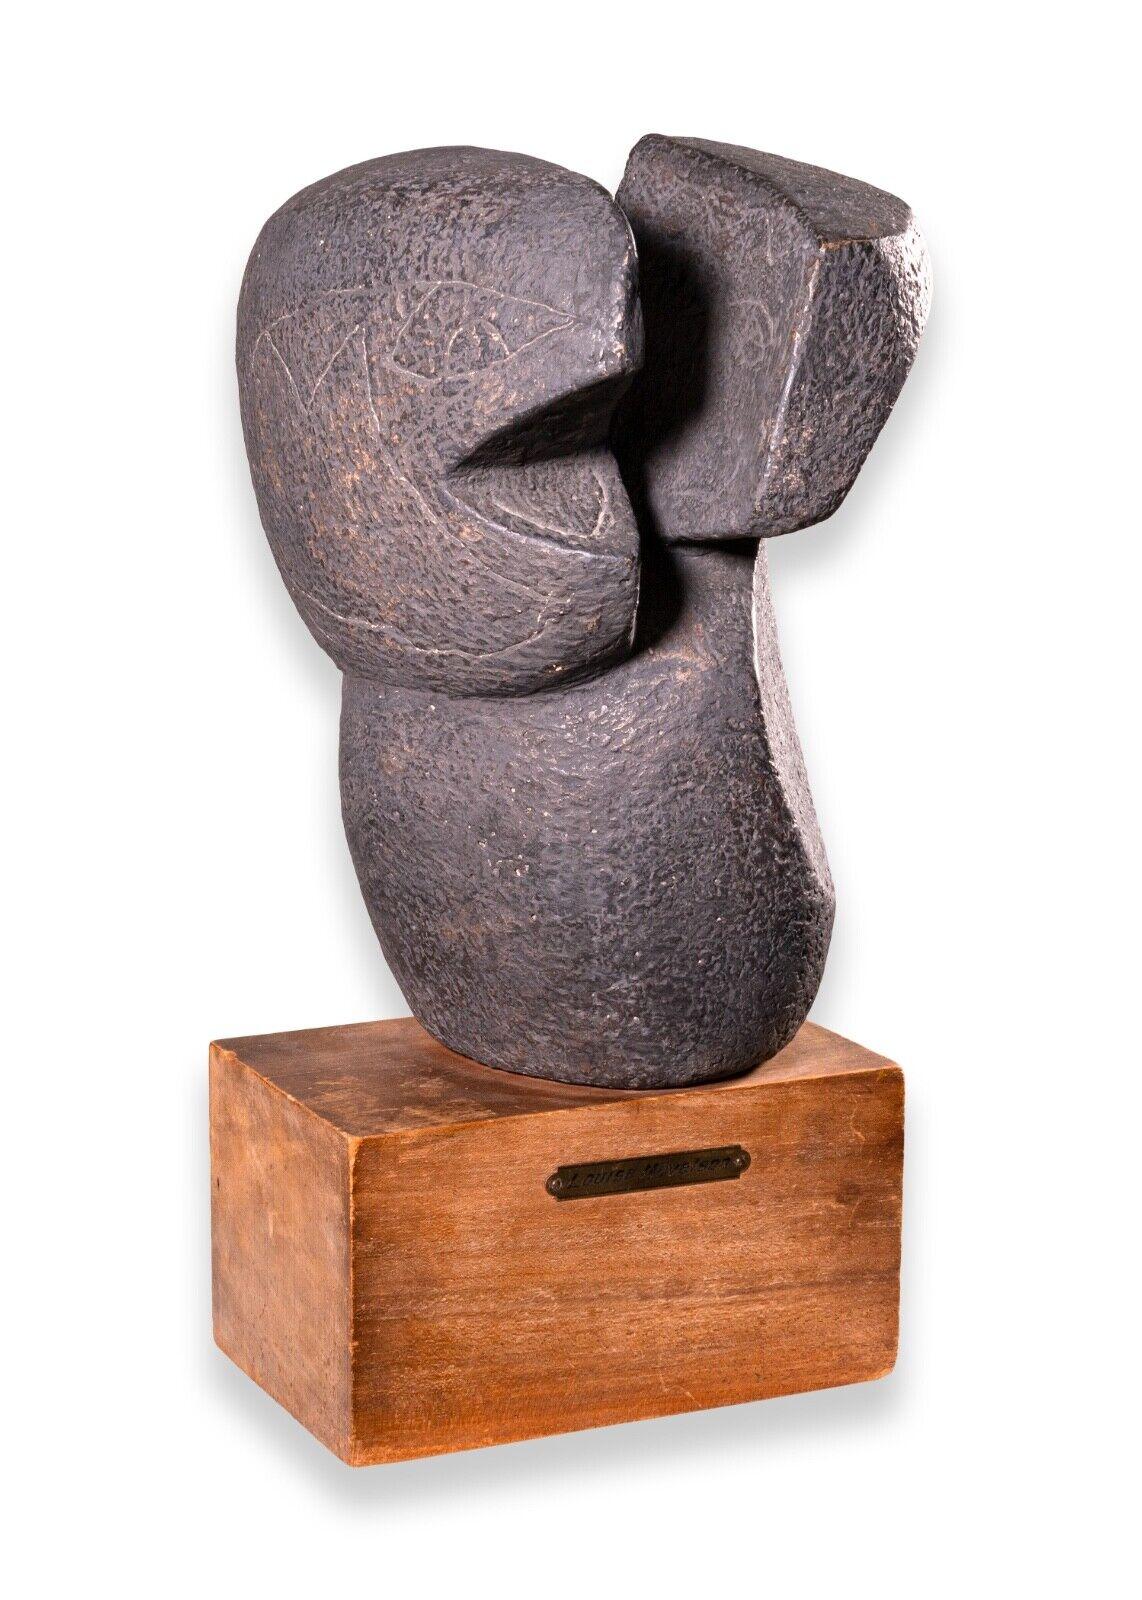 A unique abstract modern bronze sculpture by Louise Nevelson. On a wooden base with the name plaque. Original gallery and auction stickers on bottom of the base. The sculpture has a unique textural effect with small markings and a patina that is